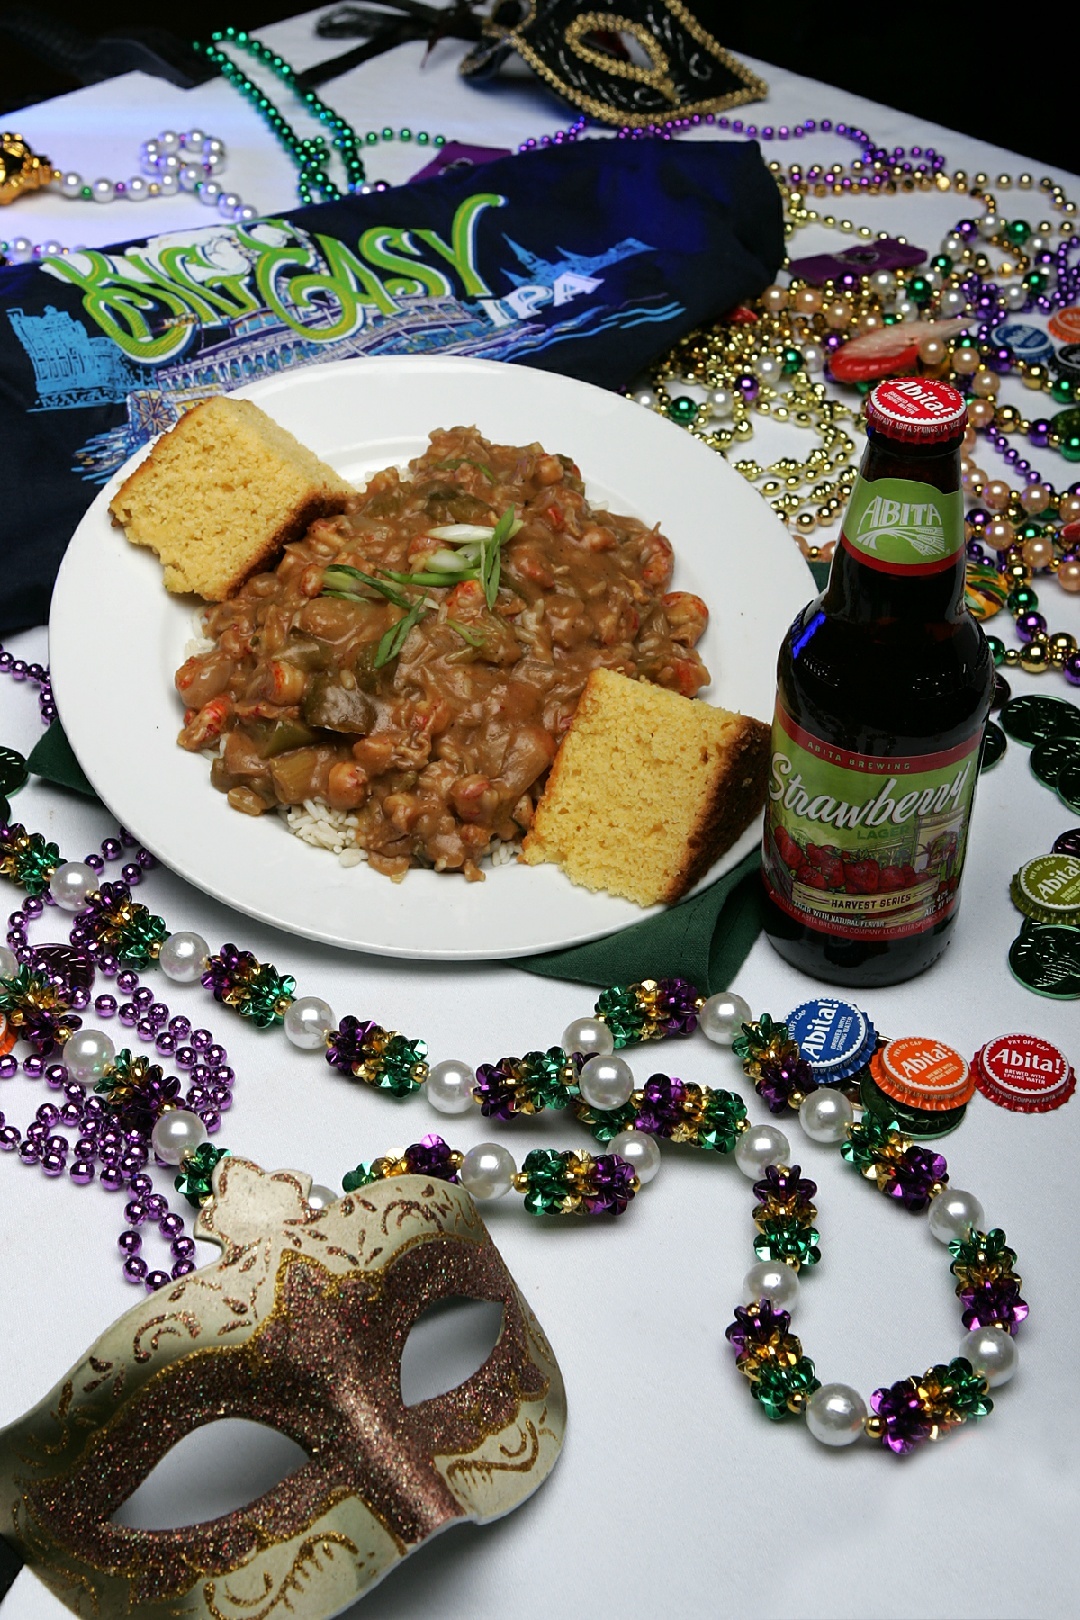 Crawfish Etouffee – one of The Big Easy's more popular dishes.